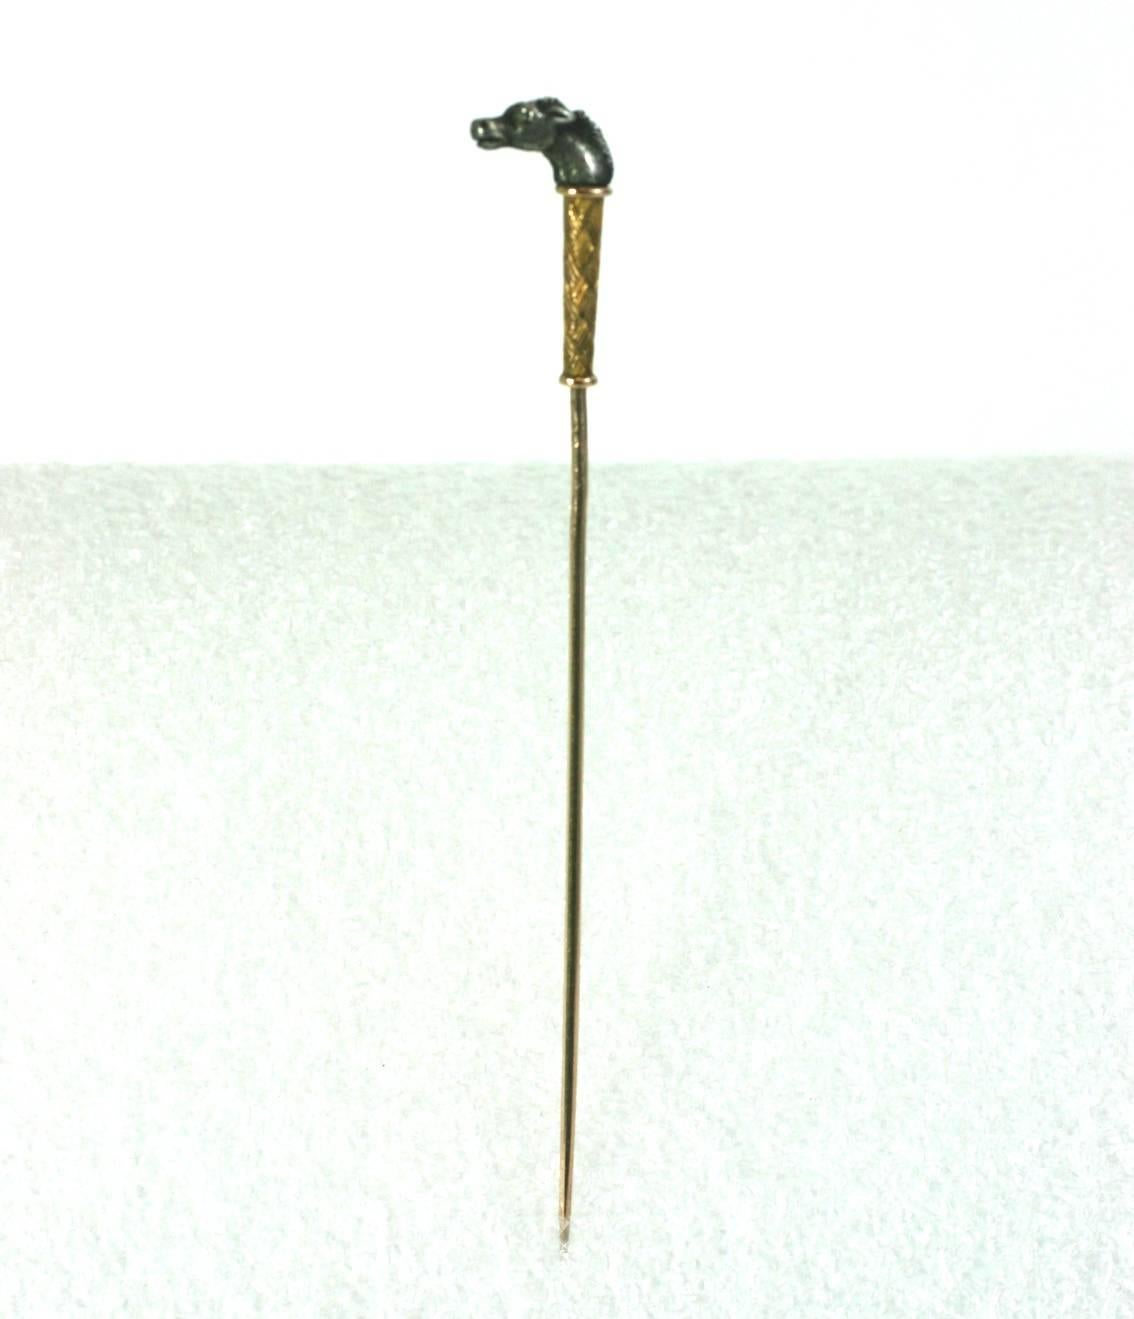 Victorian Horse Head Stickpin designed as a miniature staff. The finely detailed horse's head is sterling with a rose cut diamond eye. The hilt below has intricate basket woven detailing in gold. The shaft of the stickpin is also gold. 1880's USA.